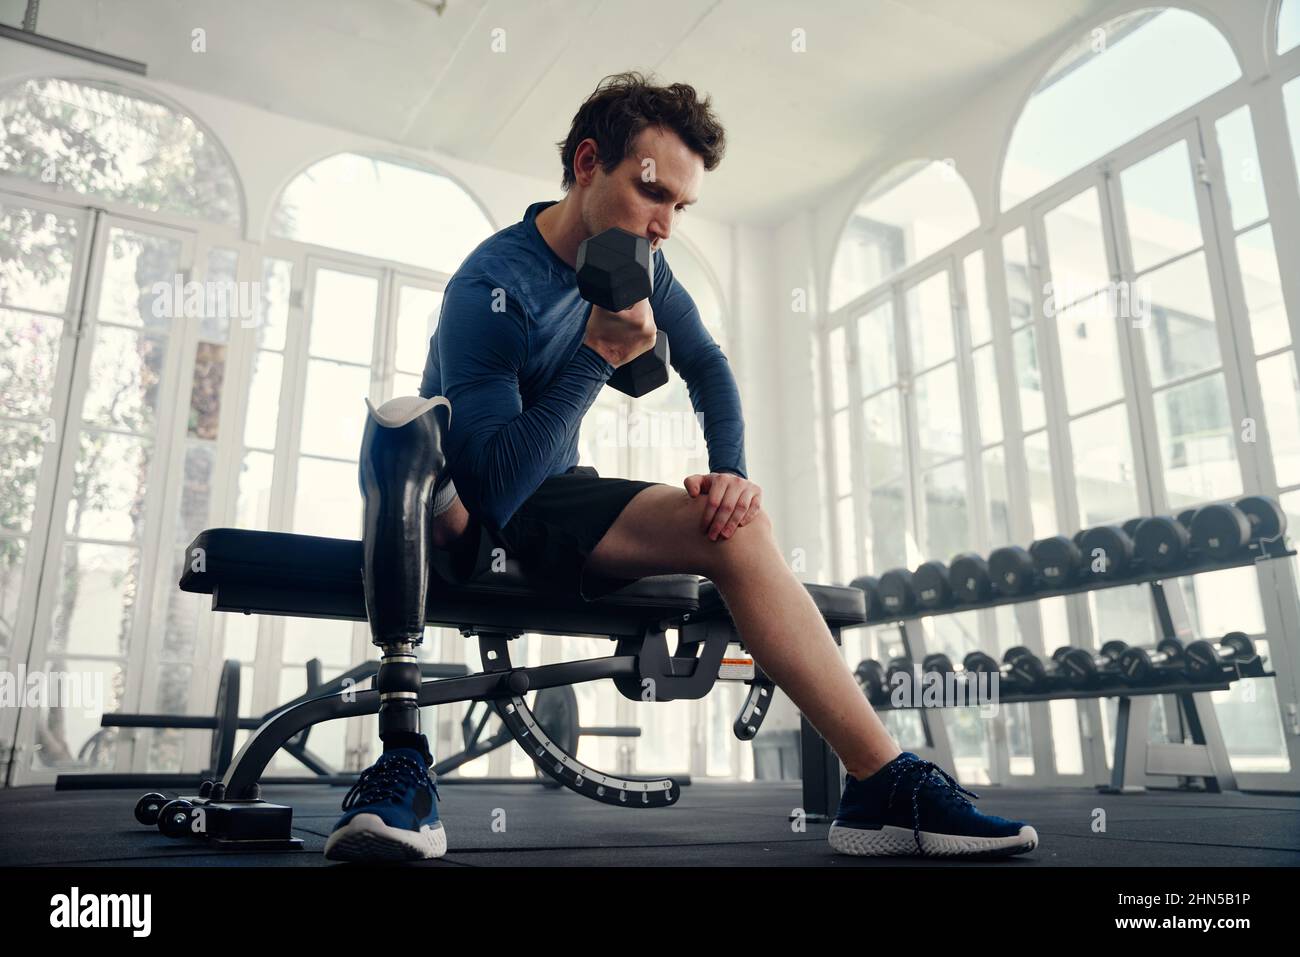 Differently abled athlete doing bicep curls in the gym preparing for the Paralympics Stock Photo